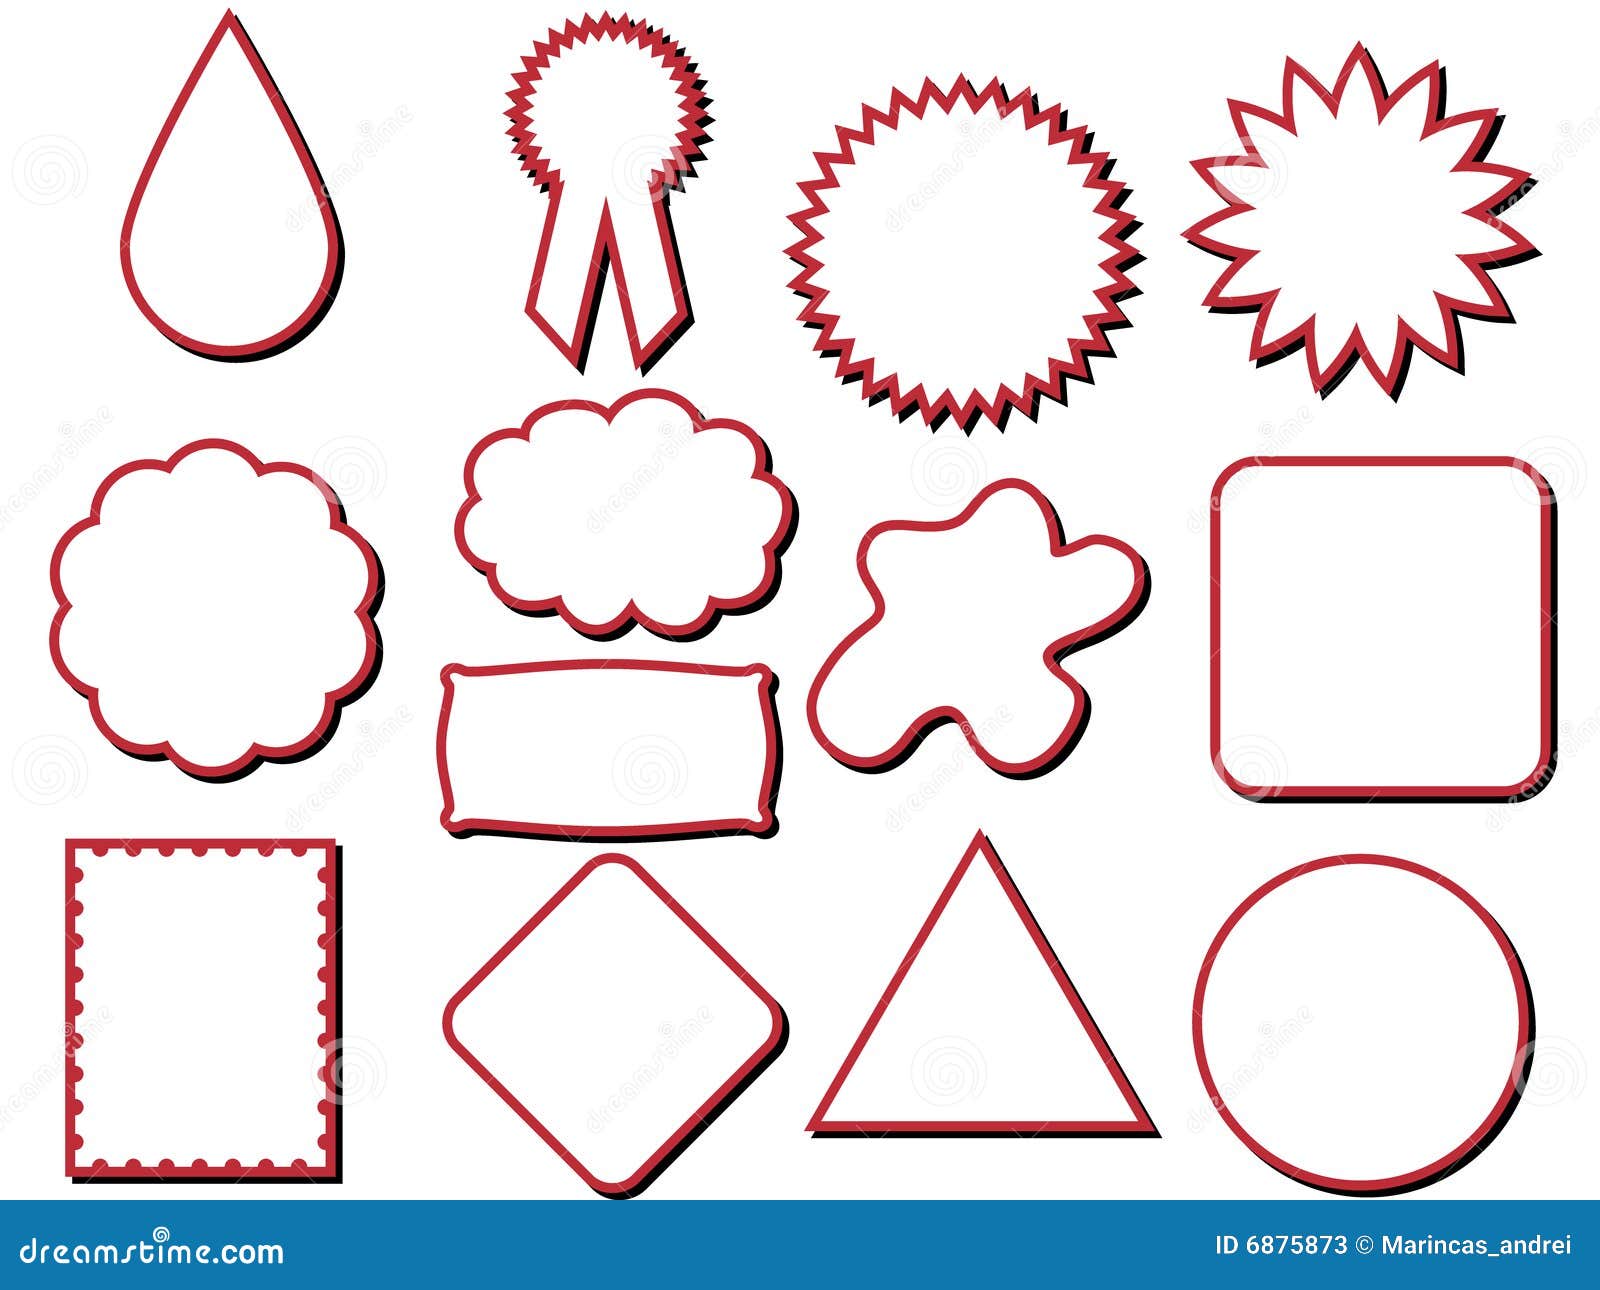 clipart of different objects - photo #38